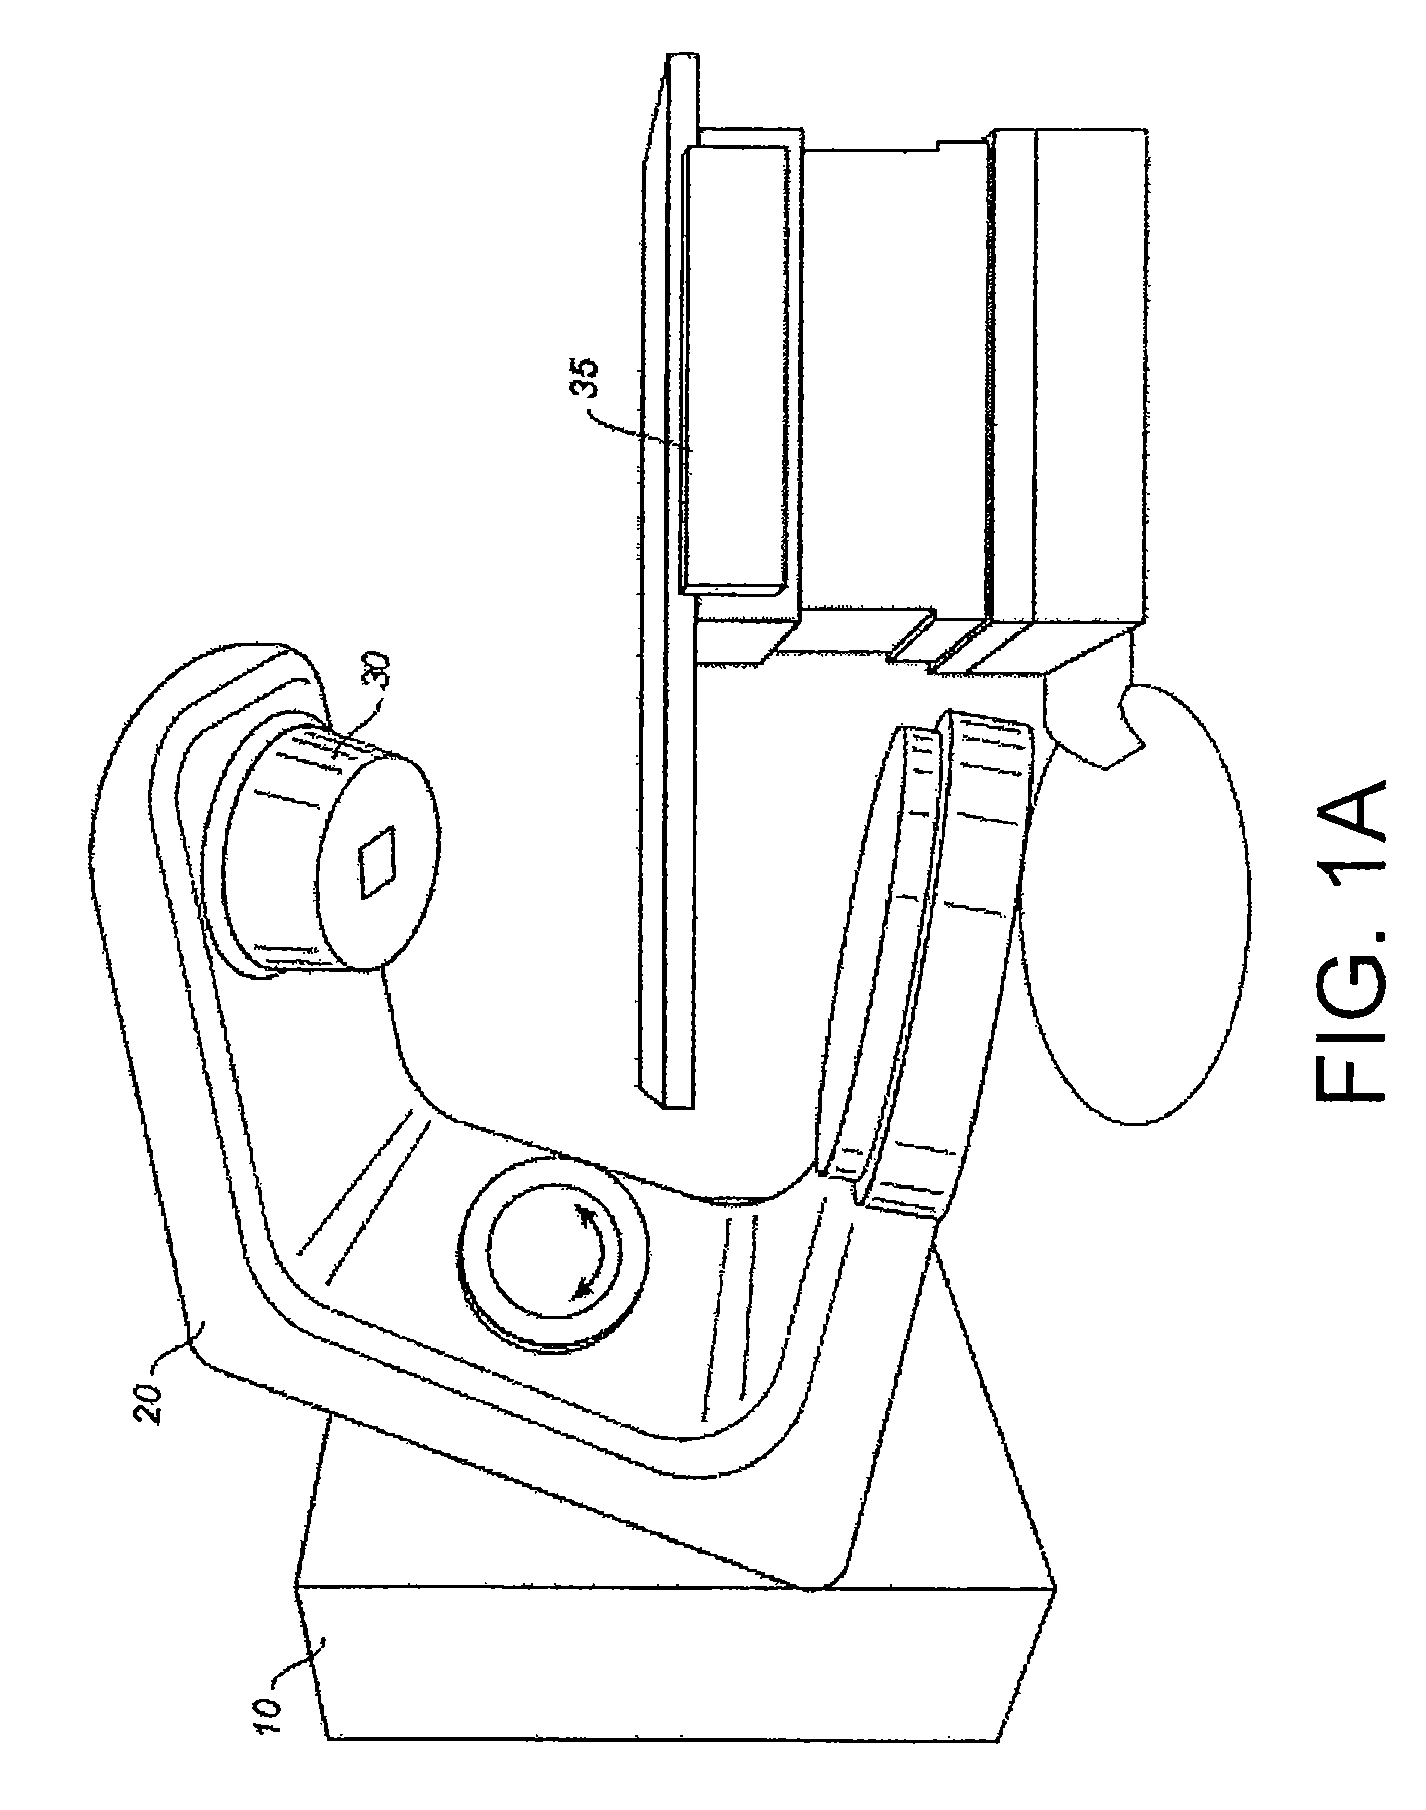 Treatment planning system and method for radiotherapy